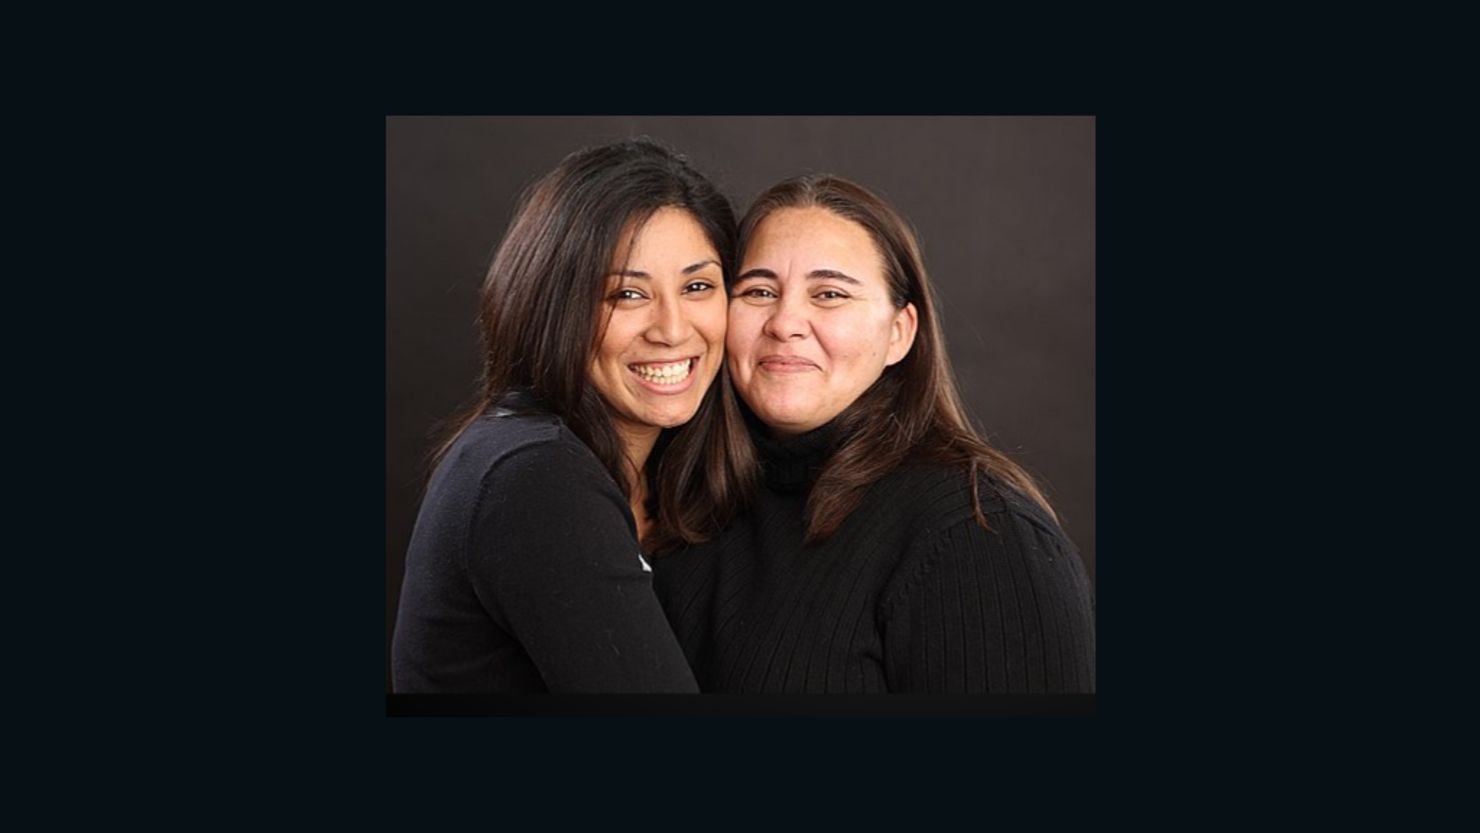 Monica Alcota (right) can remain in the U.S. with her wife Cristina Ojeda after Alcota's immigration case was dropped.